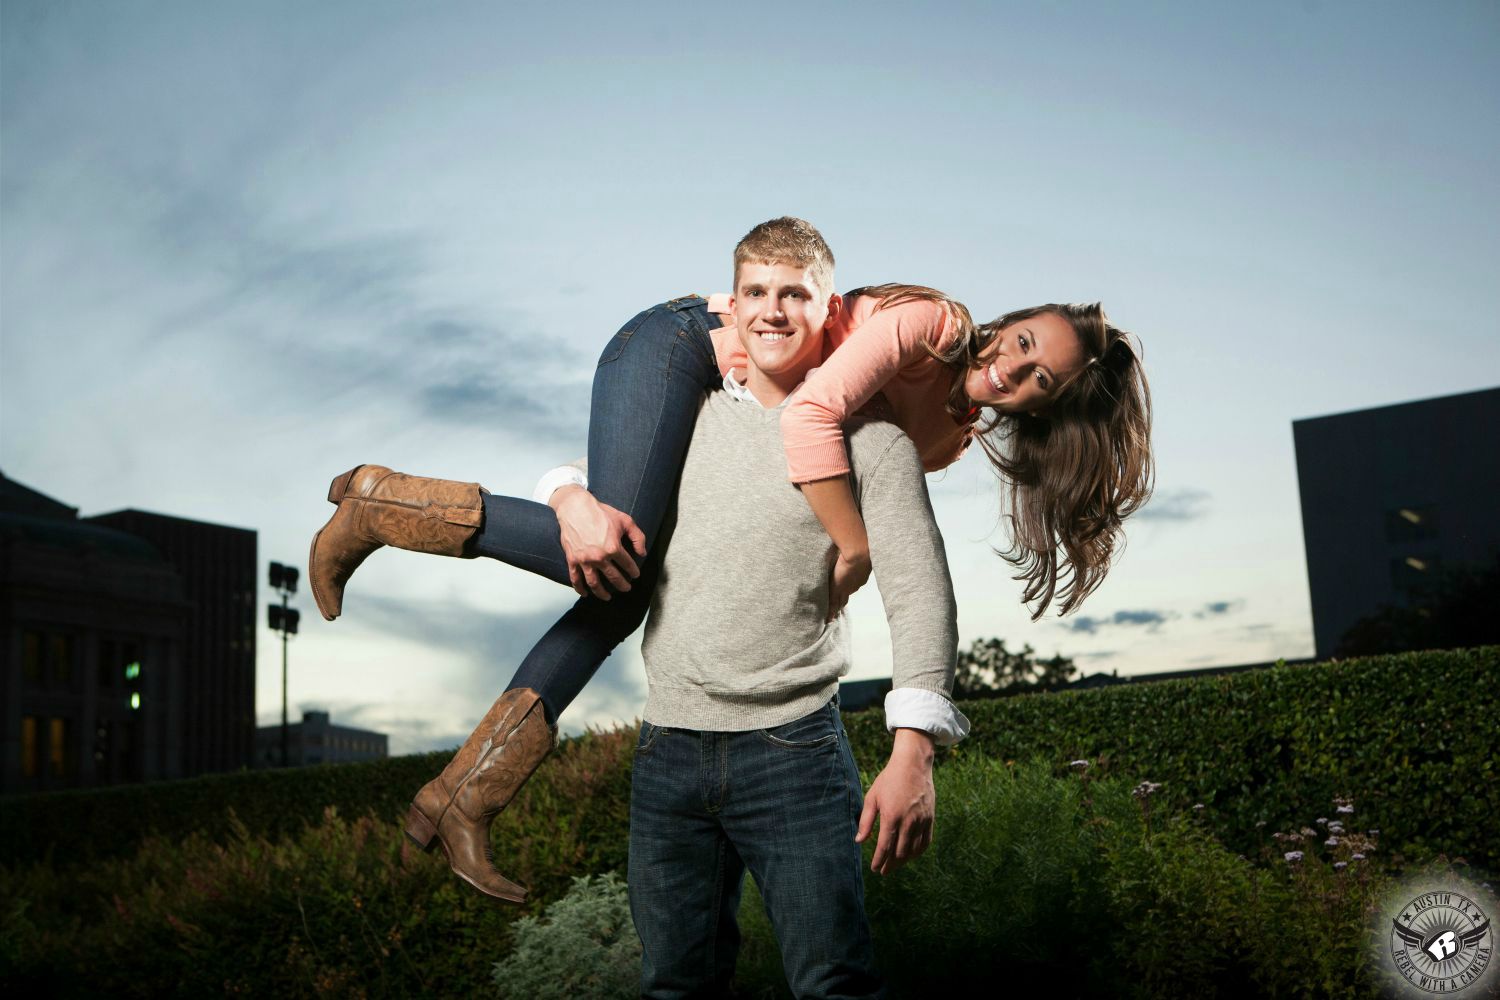 Smiling, sandy short crew cut haired guy with a grey sweater with rolled up sleeves and blue jeans throws brown haired girl wearing a pink long sleeve shirt, blue jeans and brown cowboy boots over shoulder behind the Texas Capital with bushes and hedges visible in this happy engagement photograph in Austin.